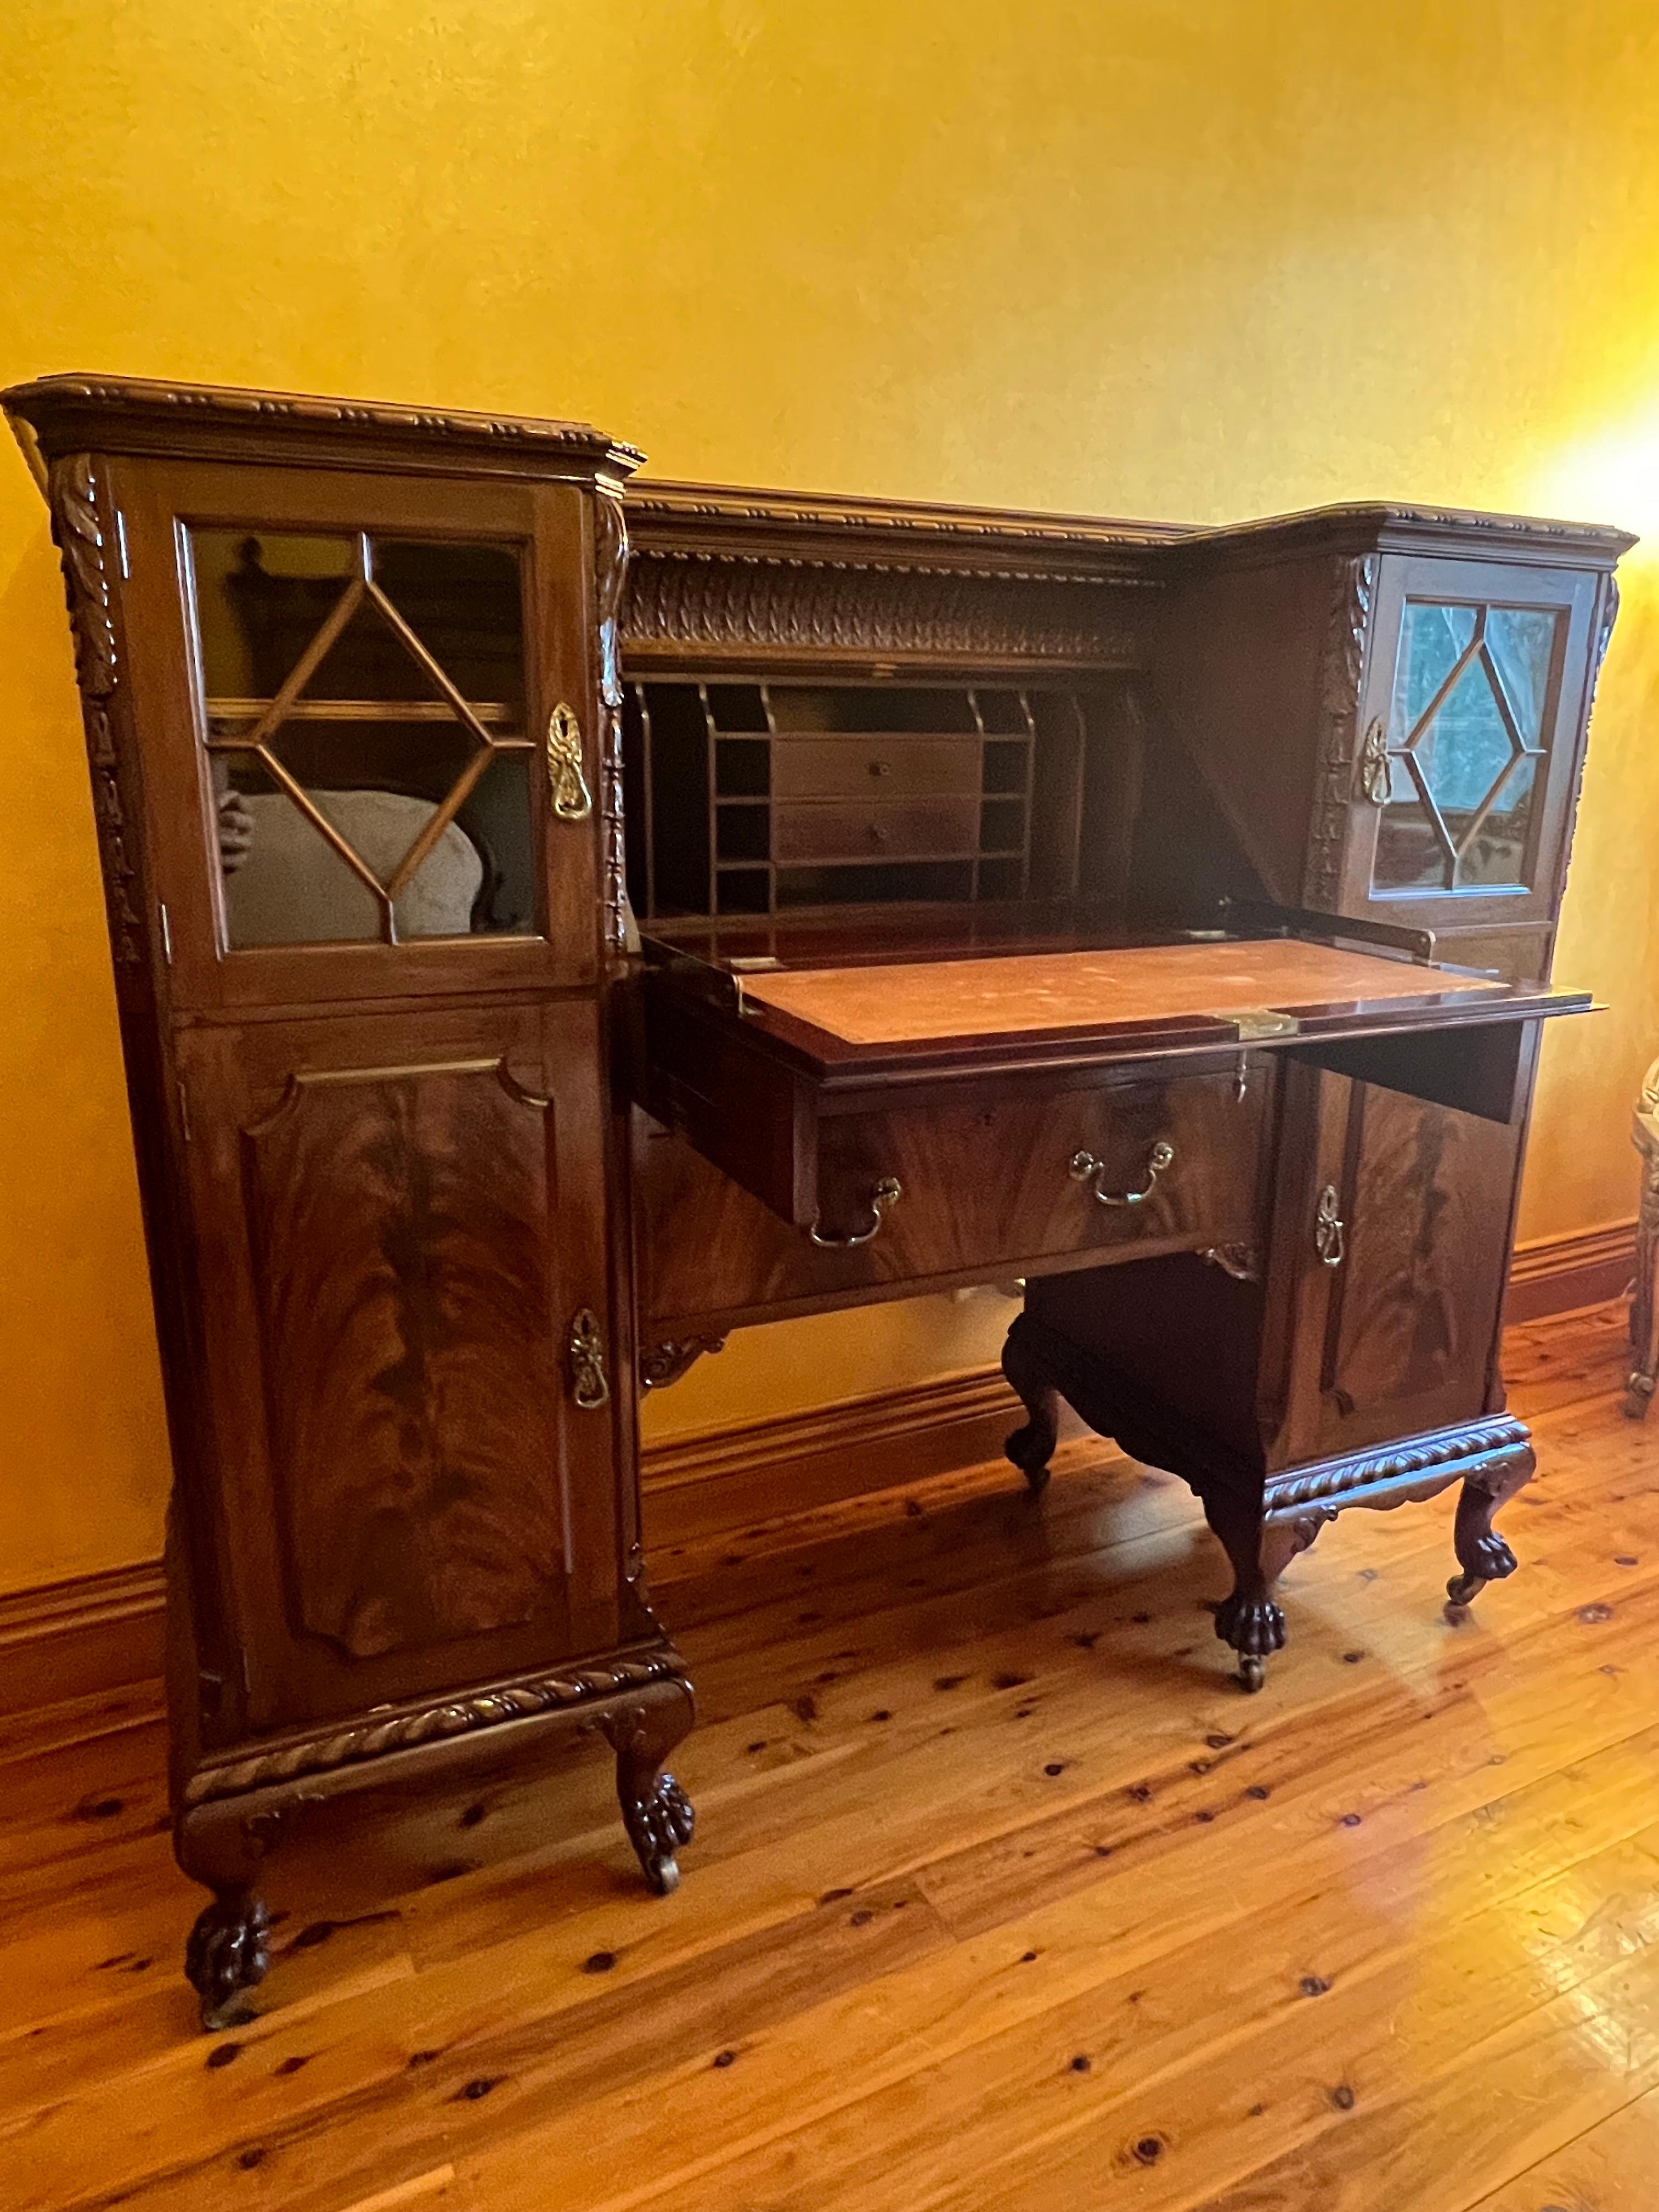 Antique English Mahogany Secretair Bureau Desk With Cabinets In Good Condition For Sale In EDENSOR PARK, NSW